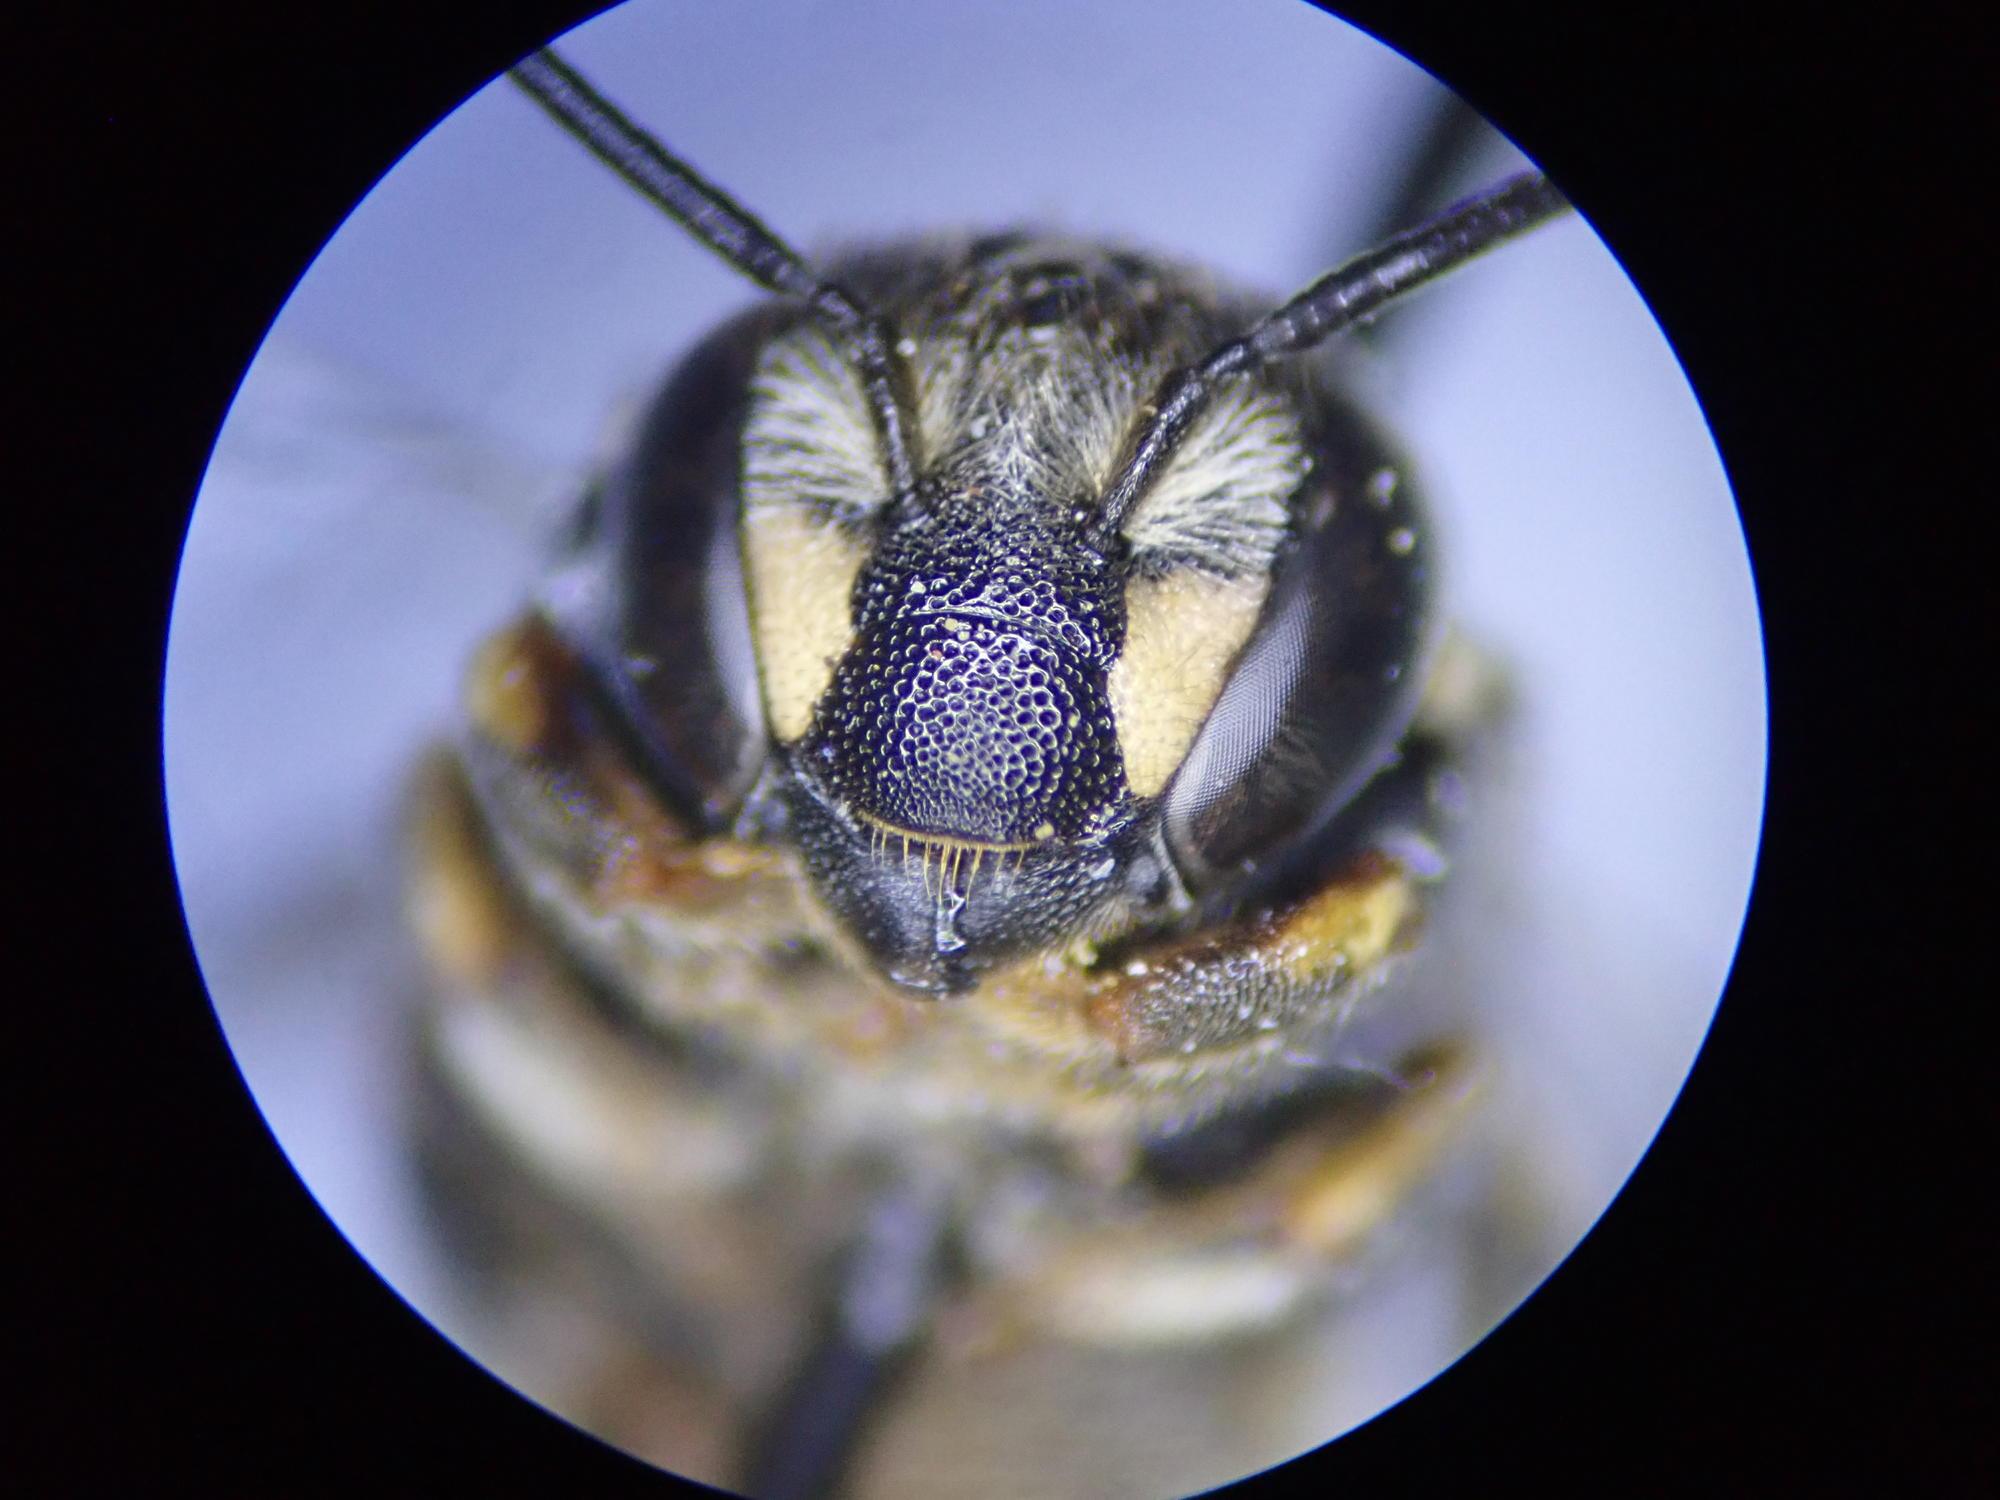 A close-up view of the face of a female Anthidiellum notatum.